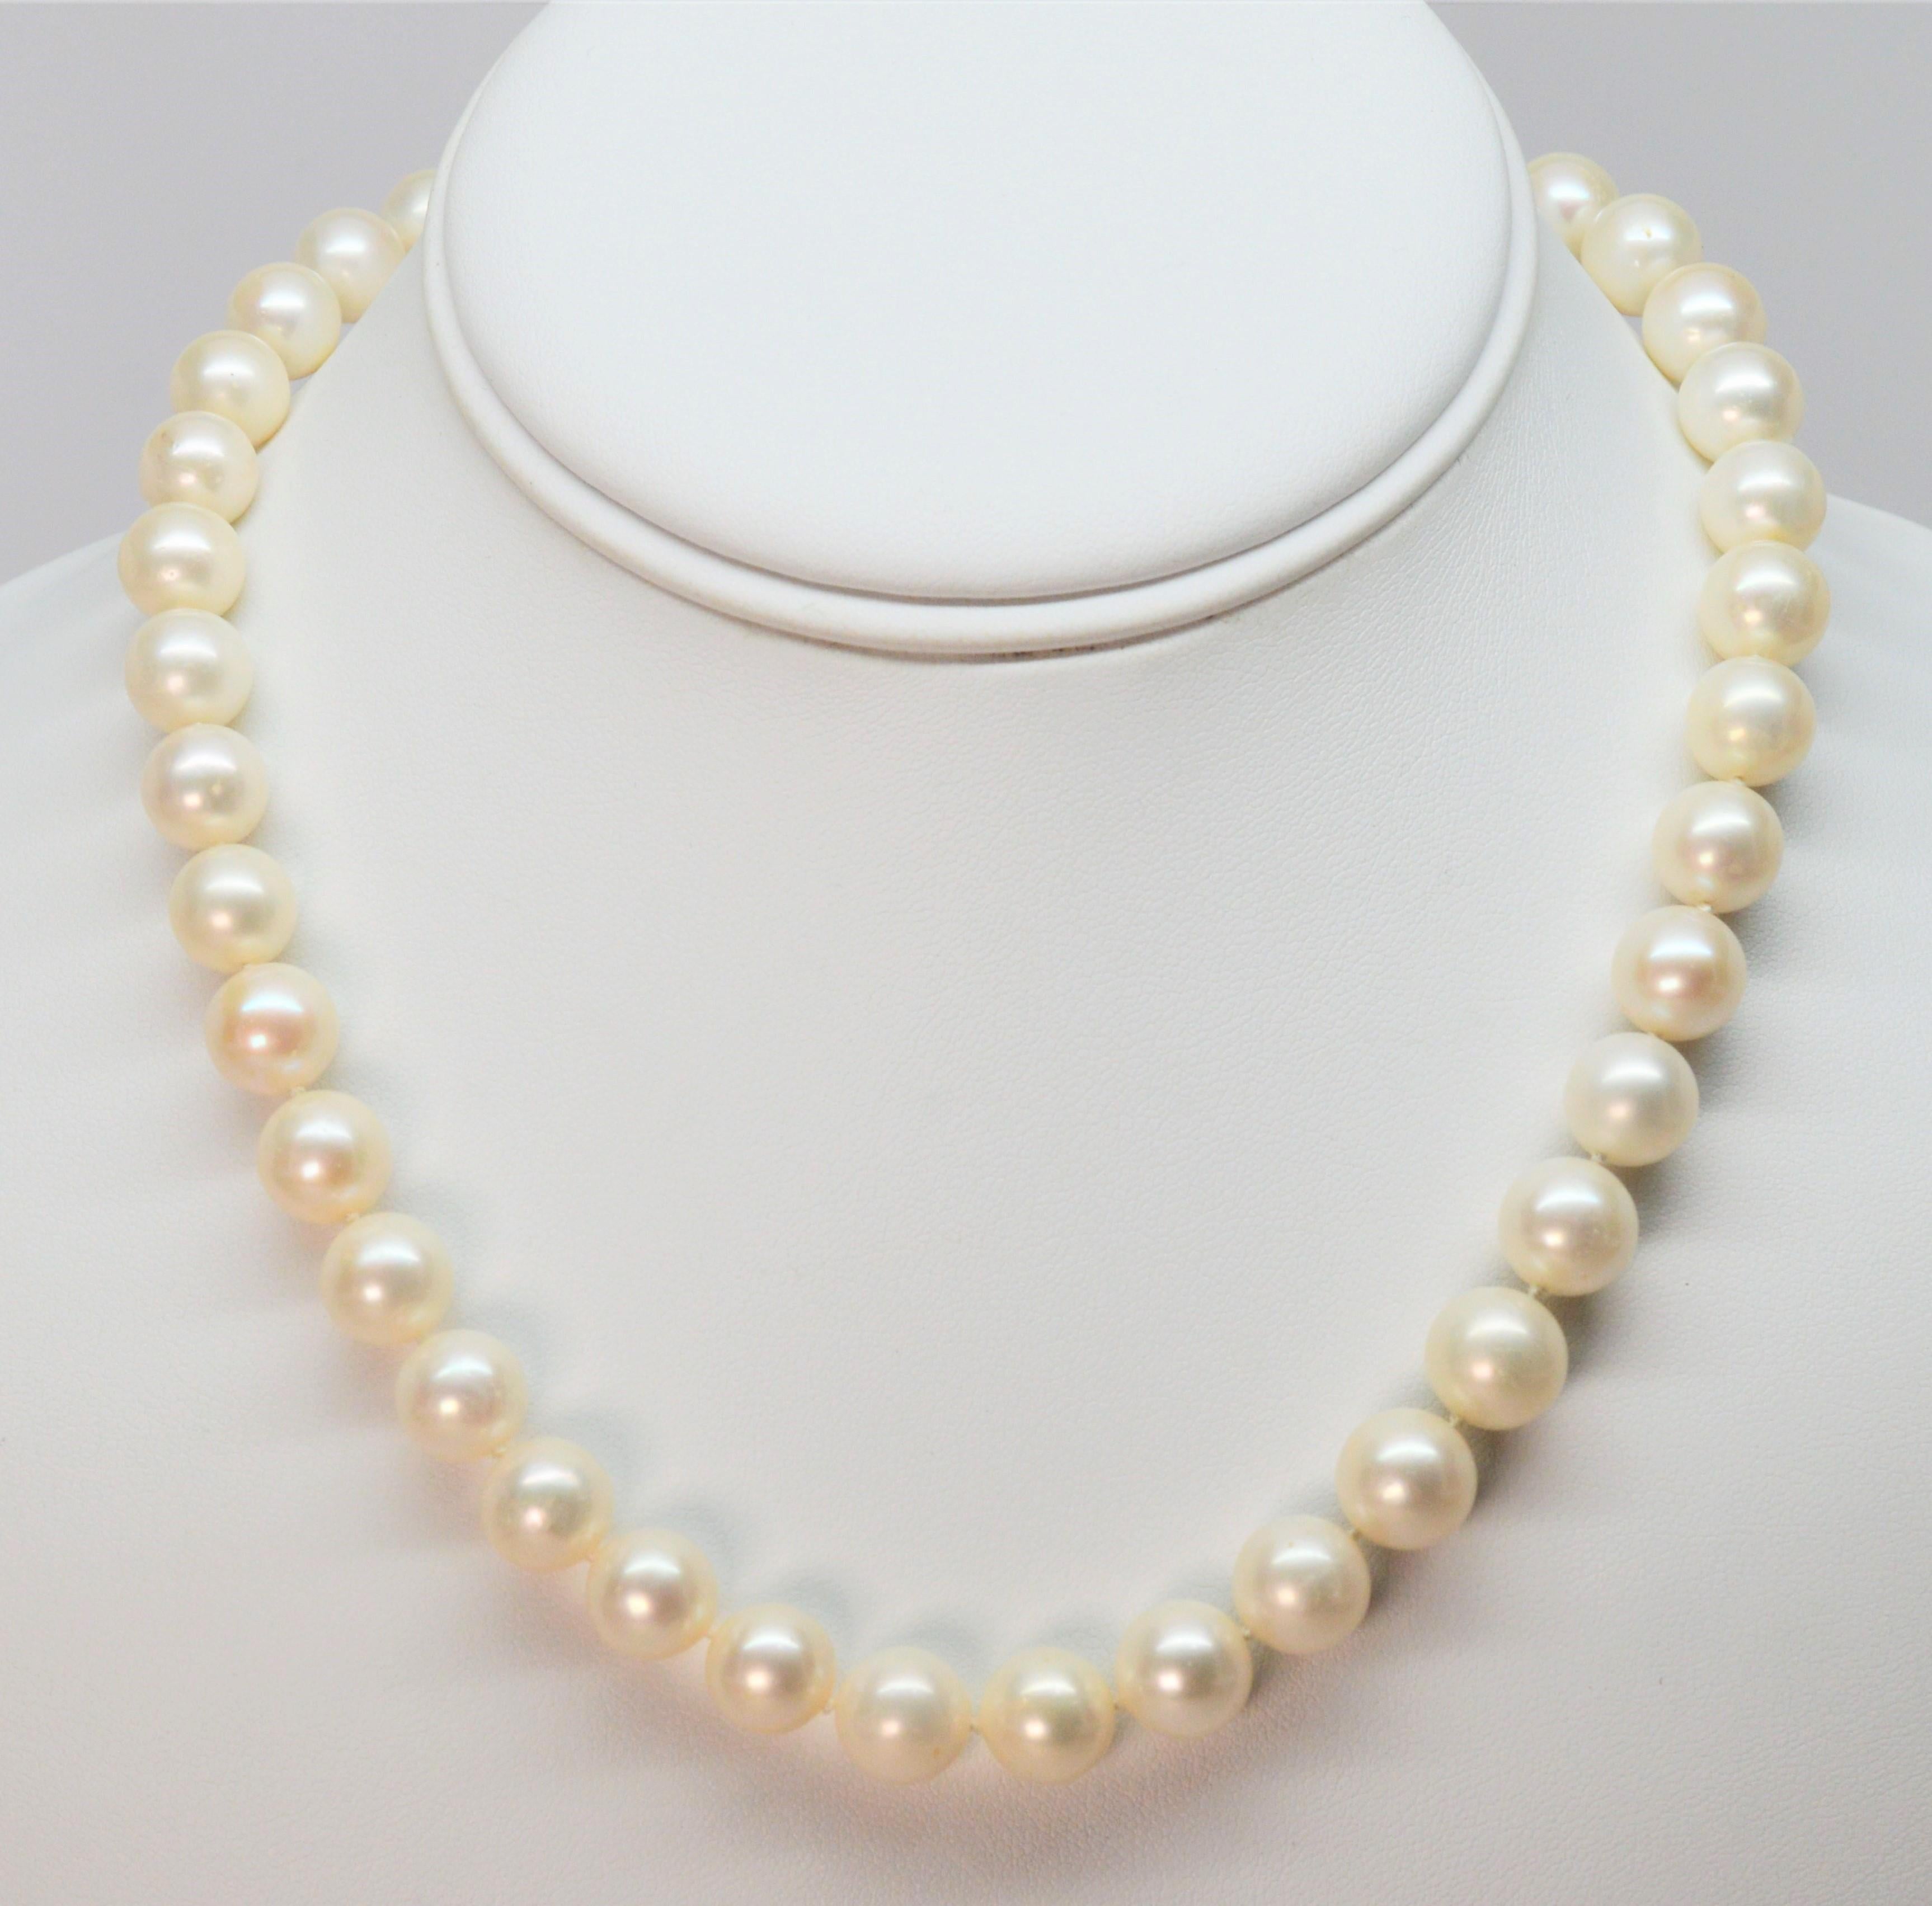 This timeless and versatile necklace design by David Yurman offers the classic beauty of a pearl strand with a contemporary twist. Round white cultured freshwater pearls, 8-8.5mm diameter, creates this 18 inch necklace that is enhanced with a pave